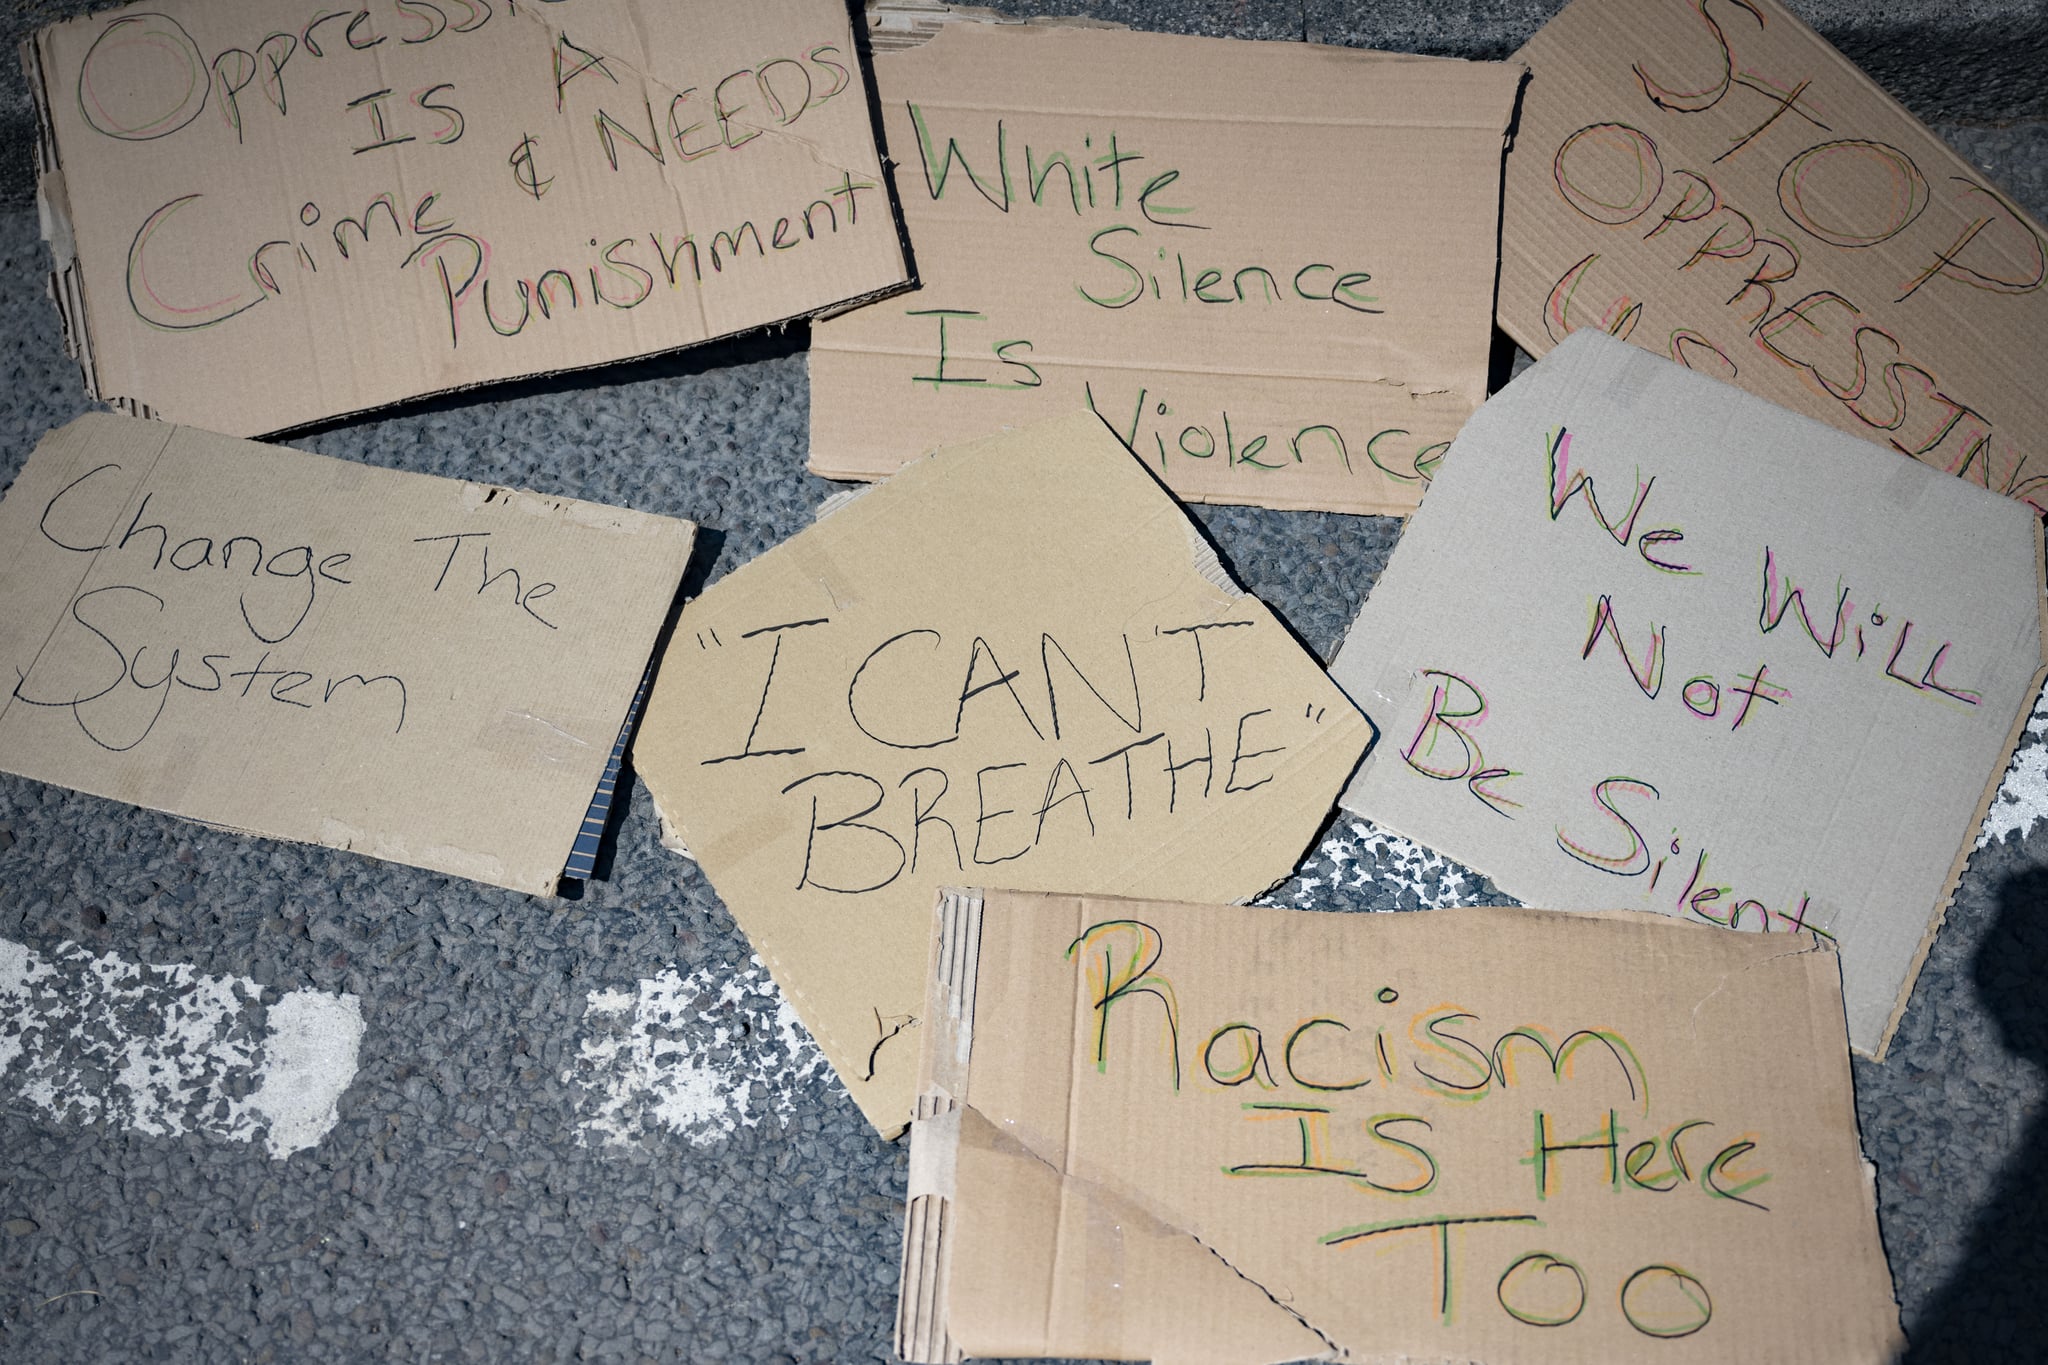 CARDIFF, WALES - MAY 31: Signs left behind following a protest outside Cardiff Castle in response to the death of George Floyd on May 31, 2020, in Cardiff, Wales. African-American George Floyd, 46, died in police custody after being arrested outside a shop in Minneapolis, Minnesota. Footage of the arrest shows a white police officer, Derek Chauvin, kneeling on George Floyd's neck while he was pinned to the floor. The death has lead to protests across the US. (Photo by Matthew Horwood/Getty Images)